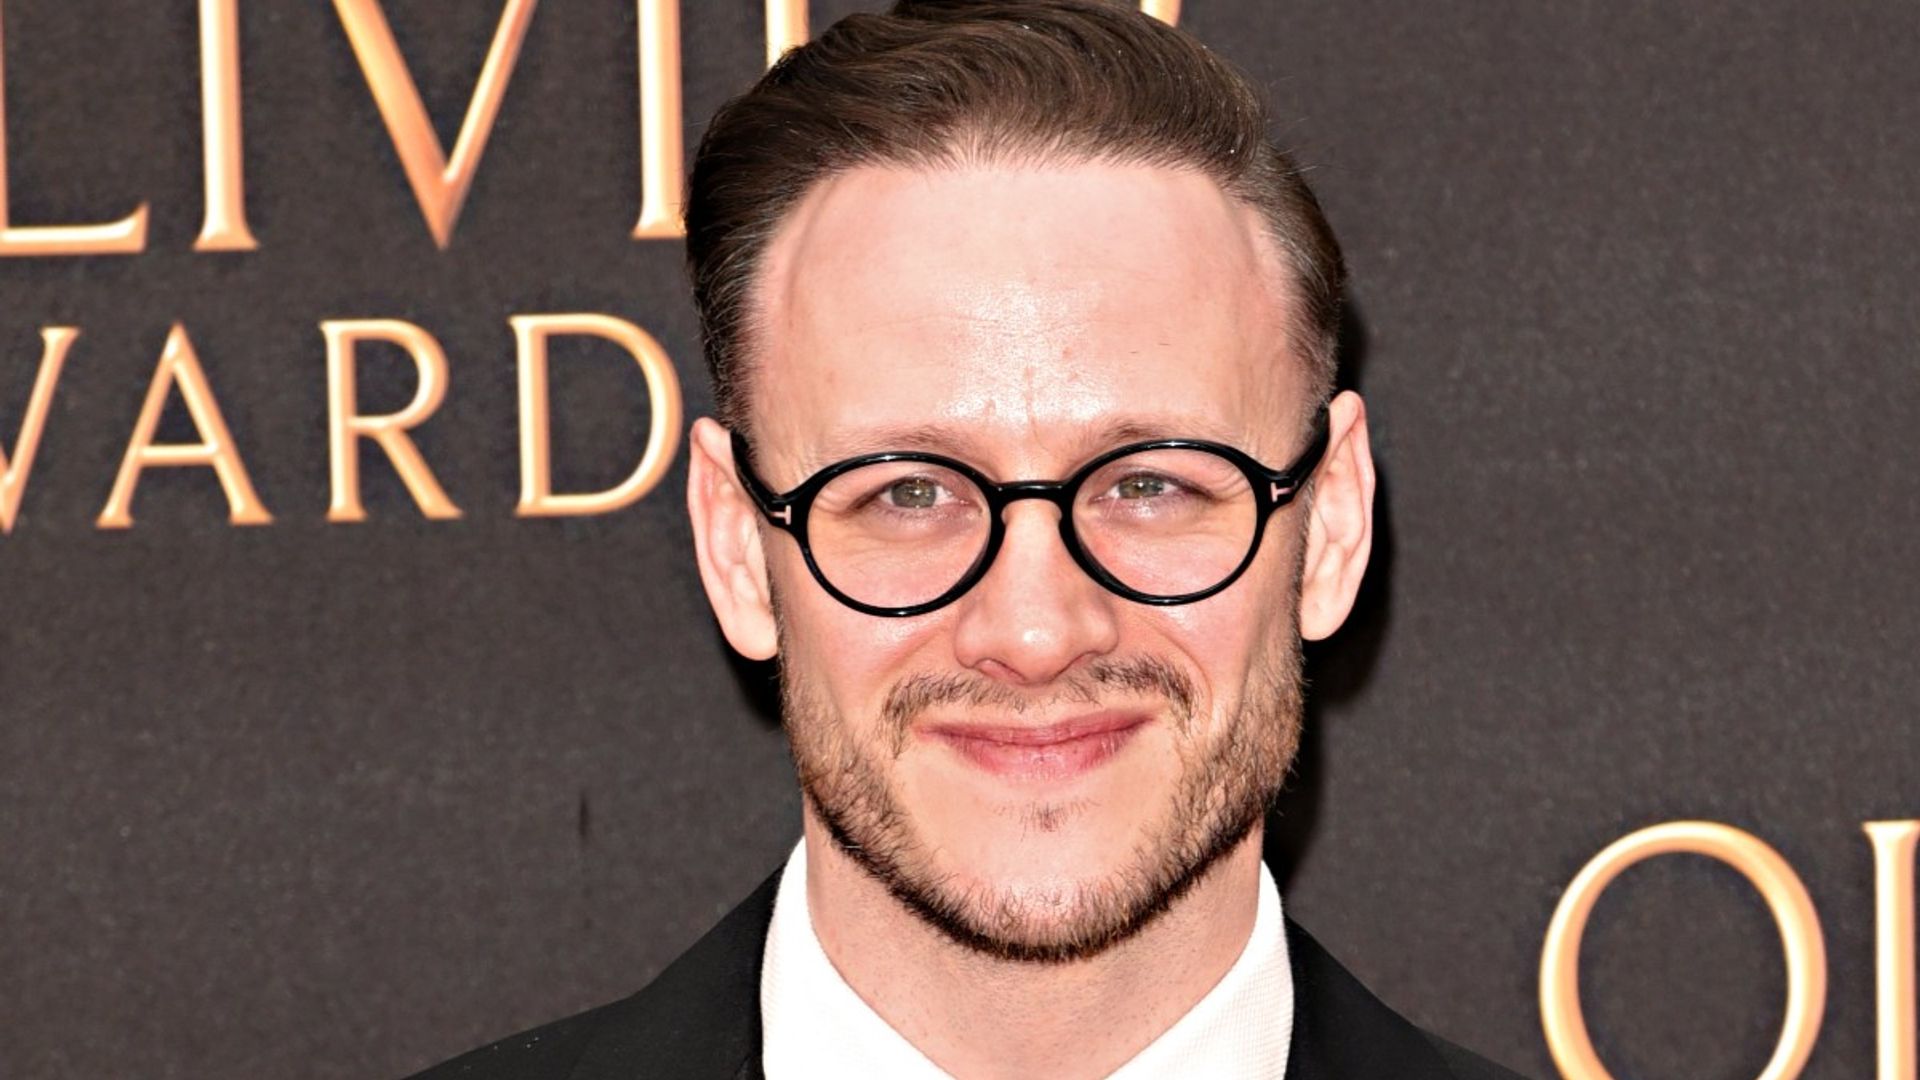 Strictly star Kevin Clifton opens up about insecurities in honest new post